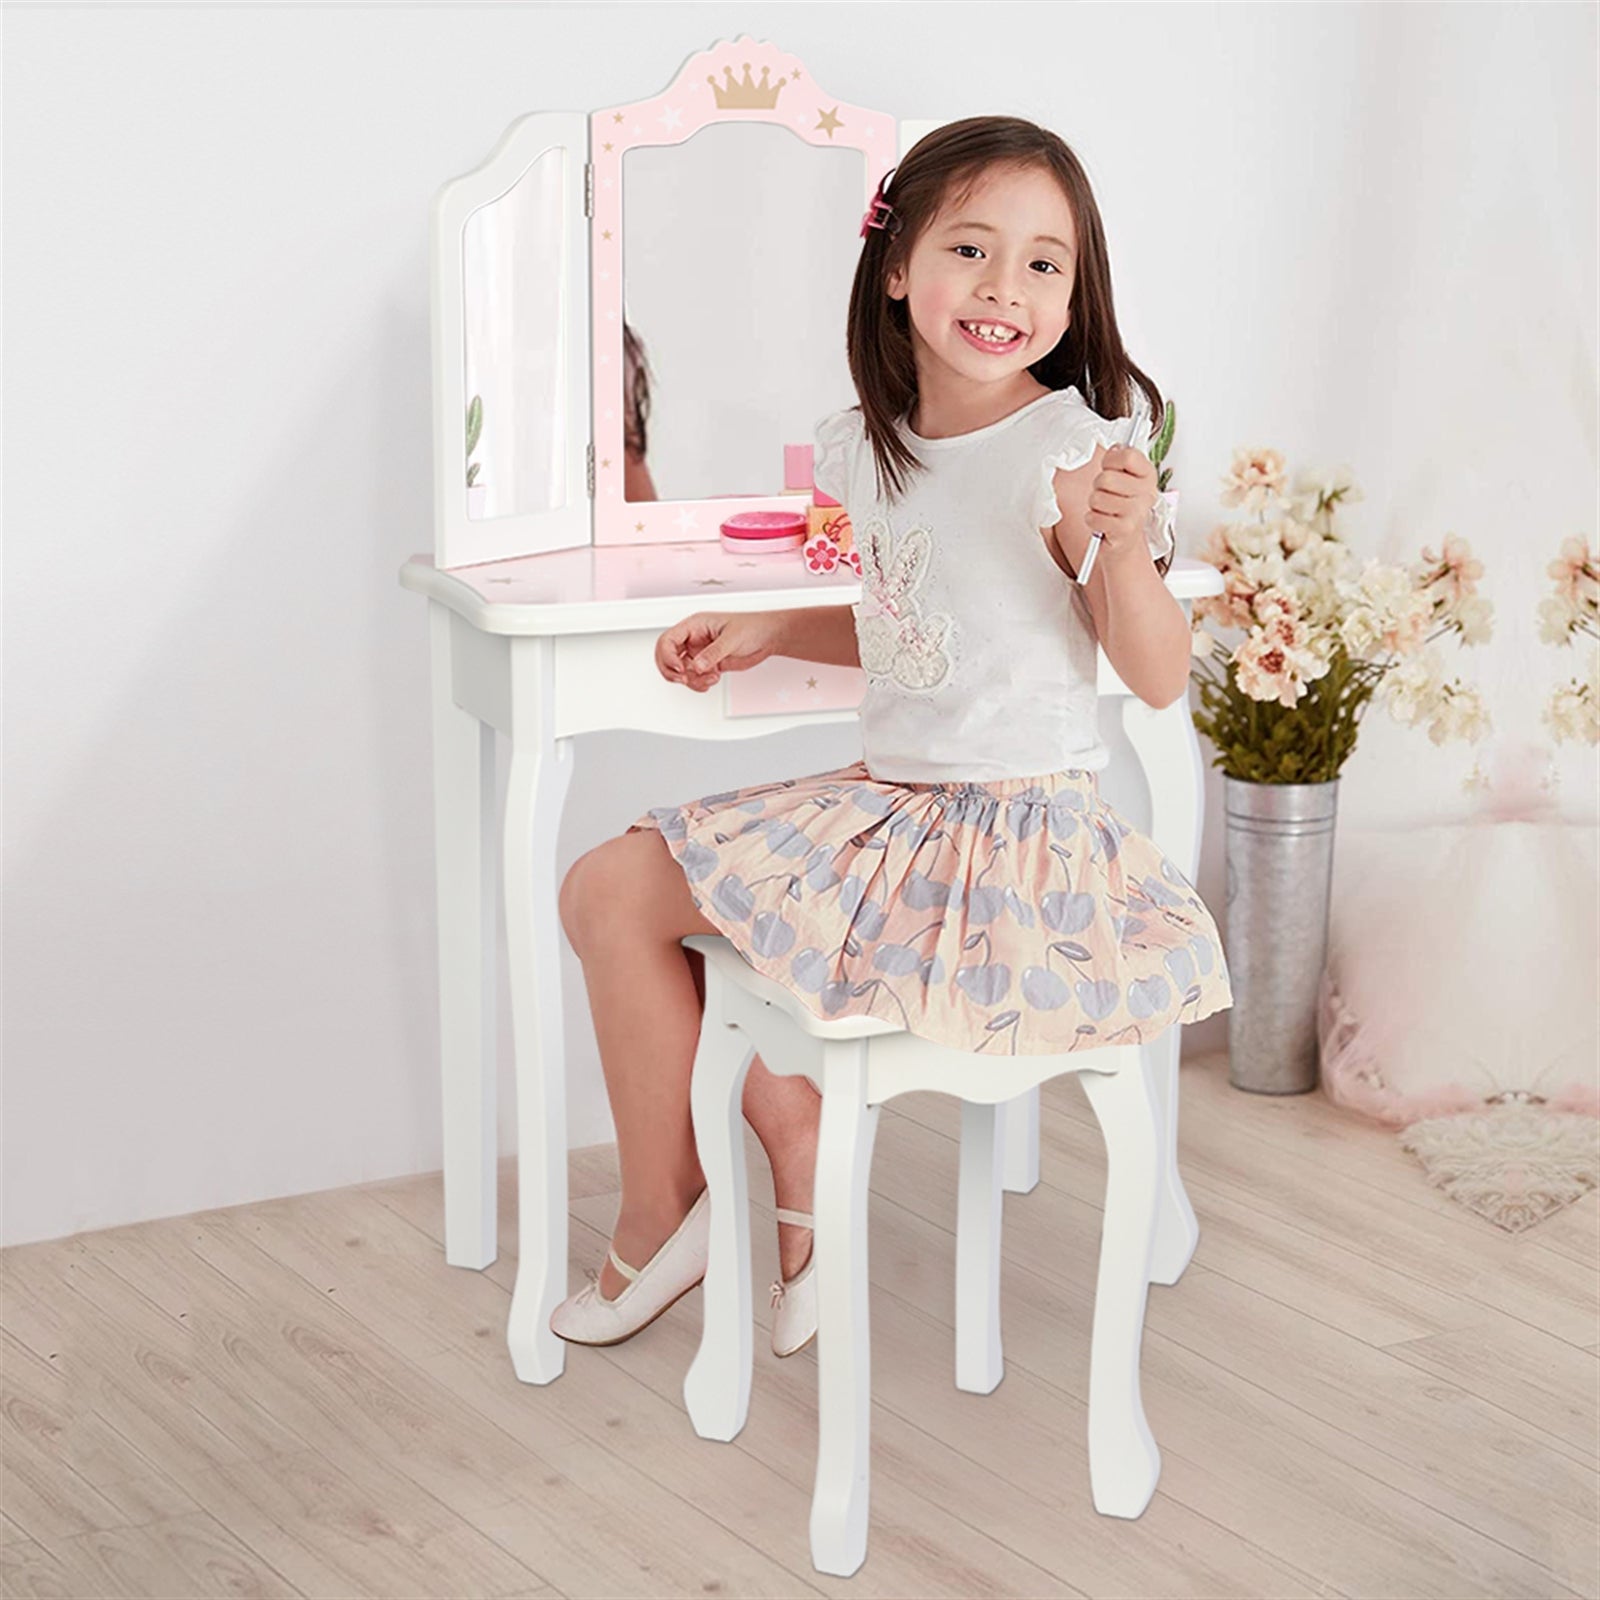 Kids Vanity Wooden Makeup Table and Chair Set